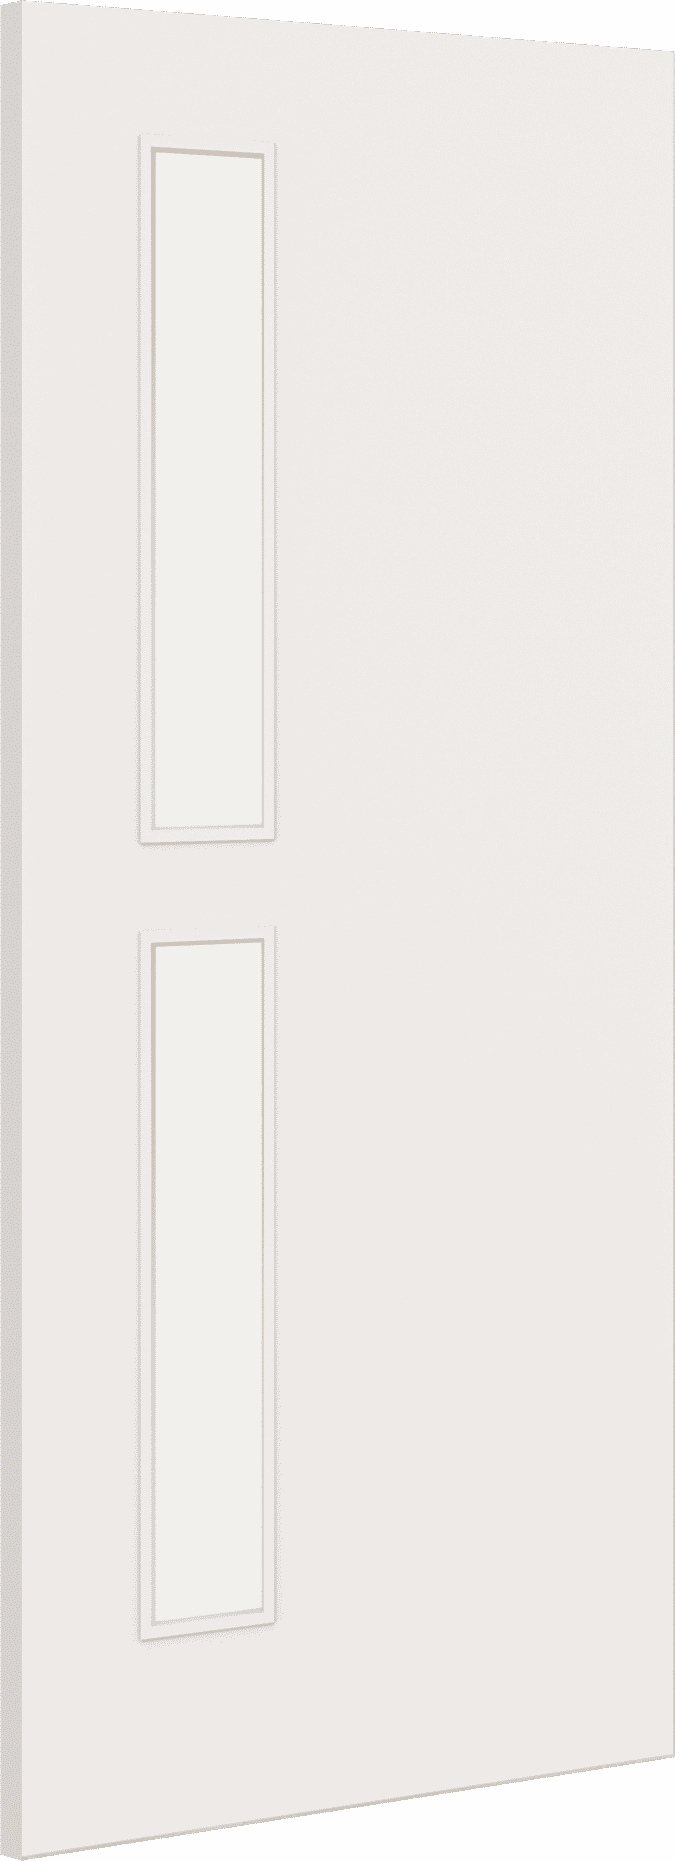 2040mm x 926mm x 44mm Architectural Paint Grade White 07 Frosted Glazed Fire Door Blank